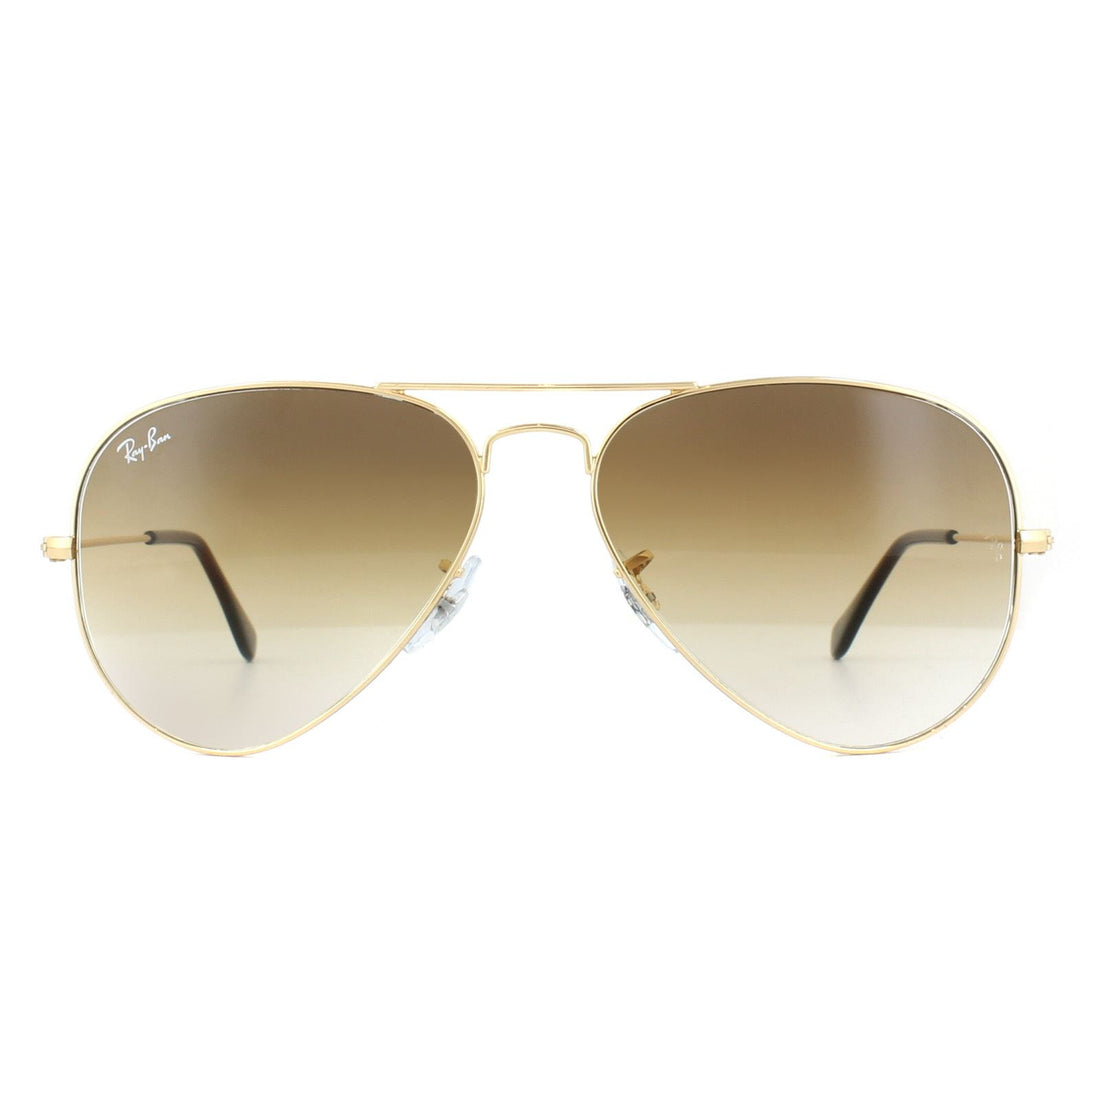 Ray-Ban Aviator Gradient RB3025 Sunglasses Gold / Brown Gradient 58